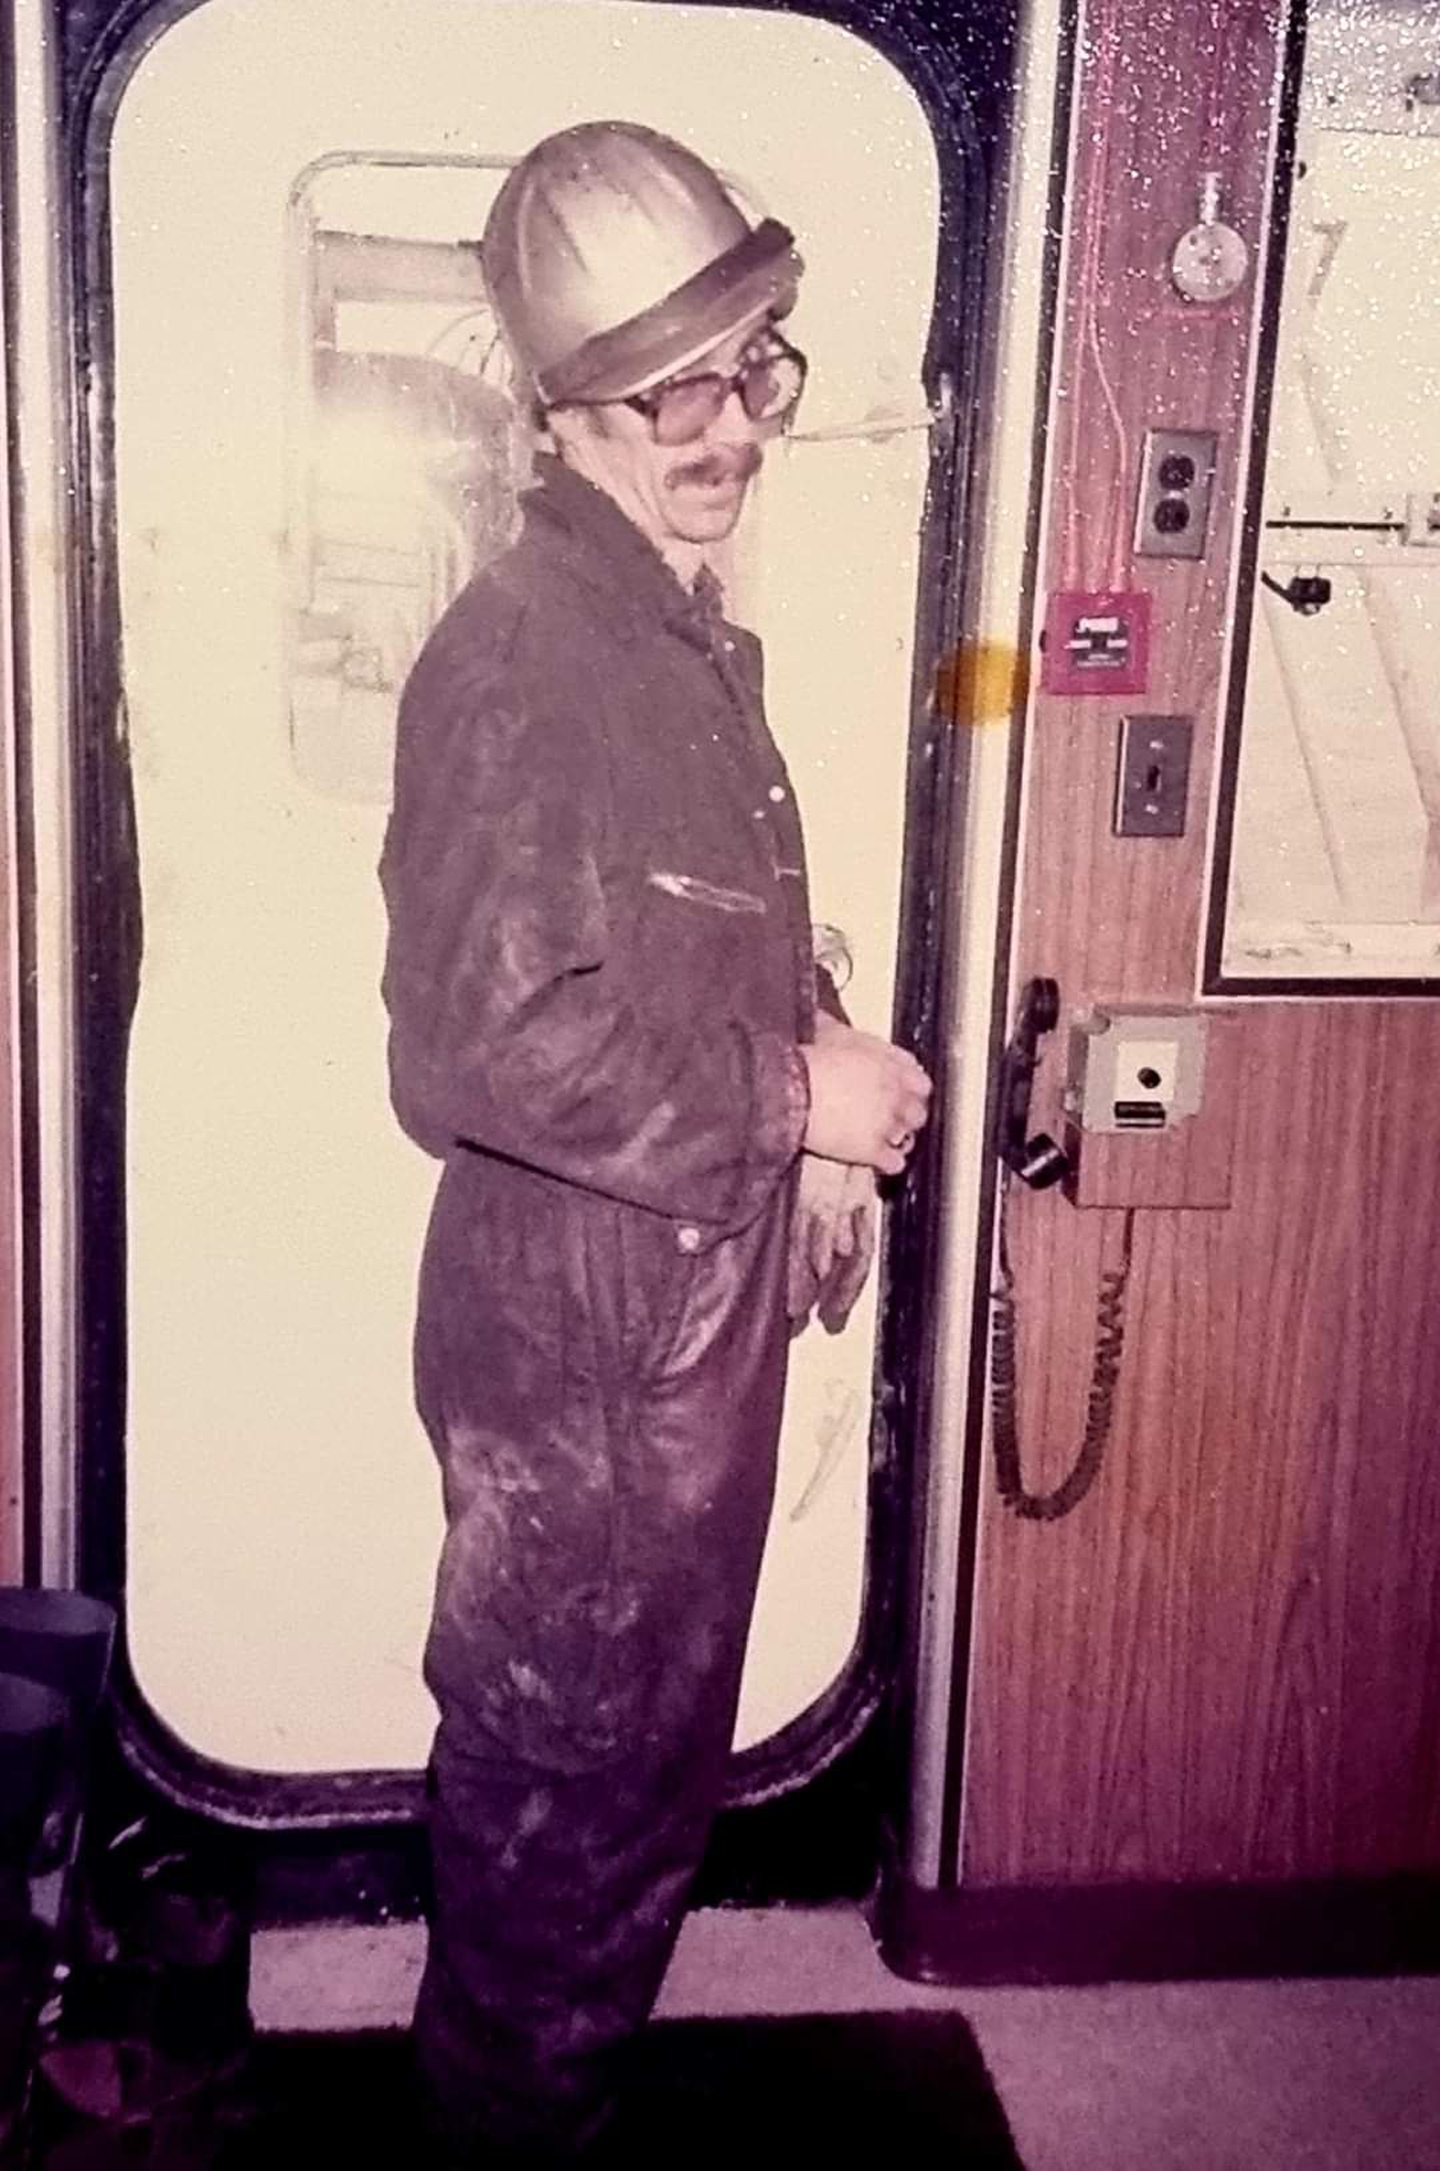 Colin Adamson wearing a hard hat and boilet suit while working in the oil and gas industry, in an old photograph. 